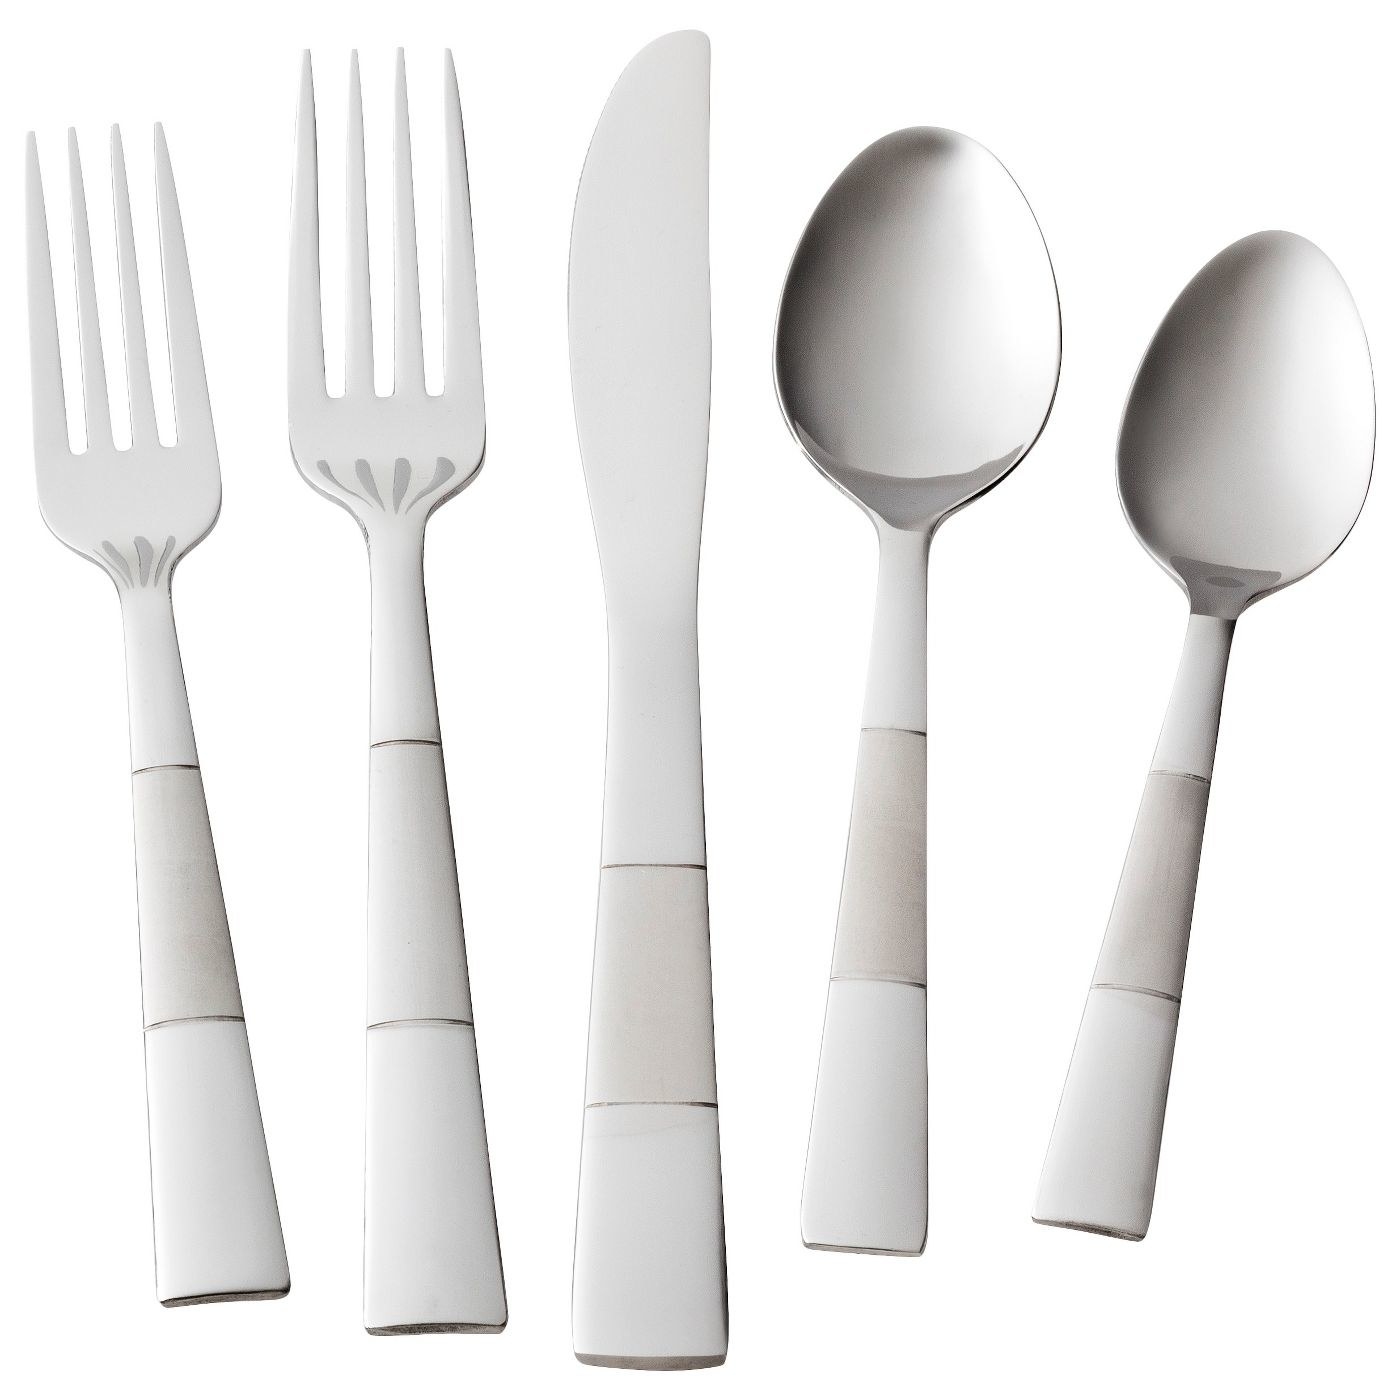 Silver silverware with cool lines